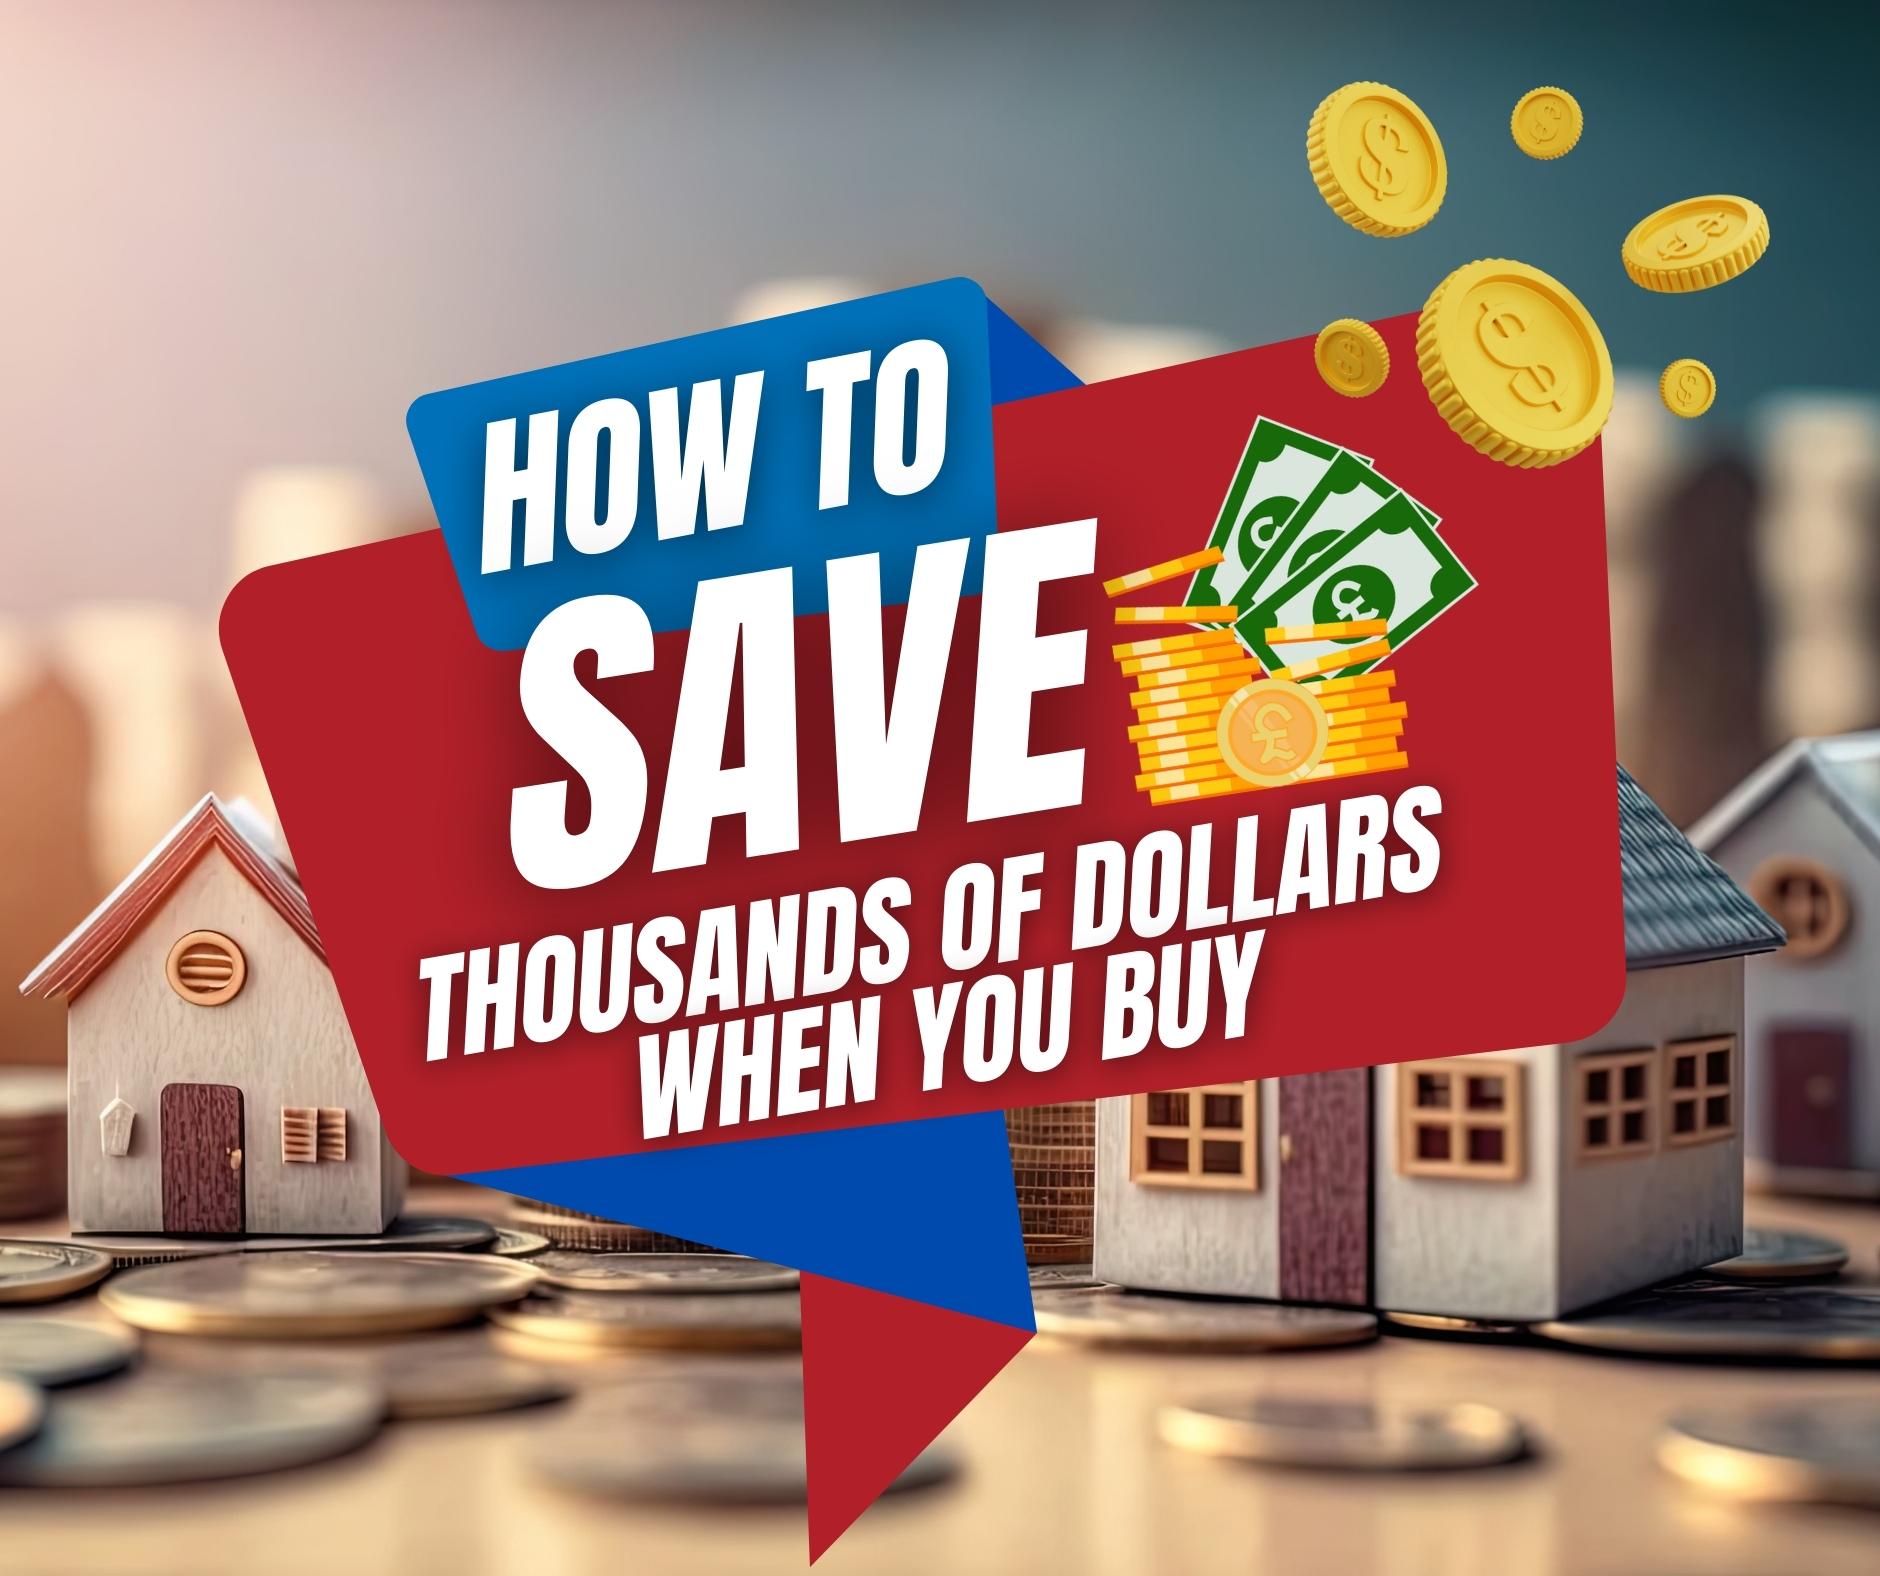 How To Save Thousands Of Dollars When You Buy